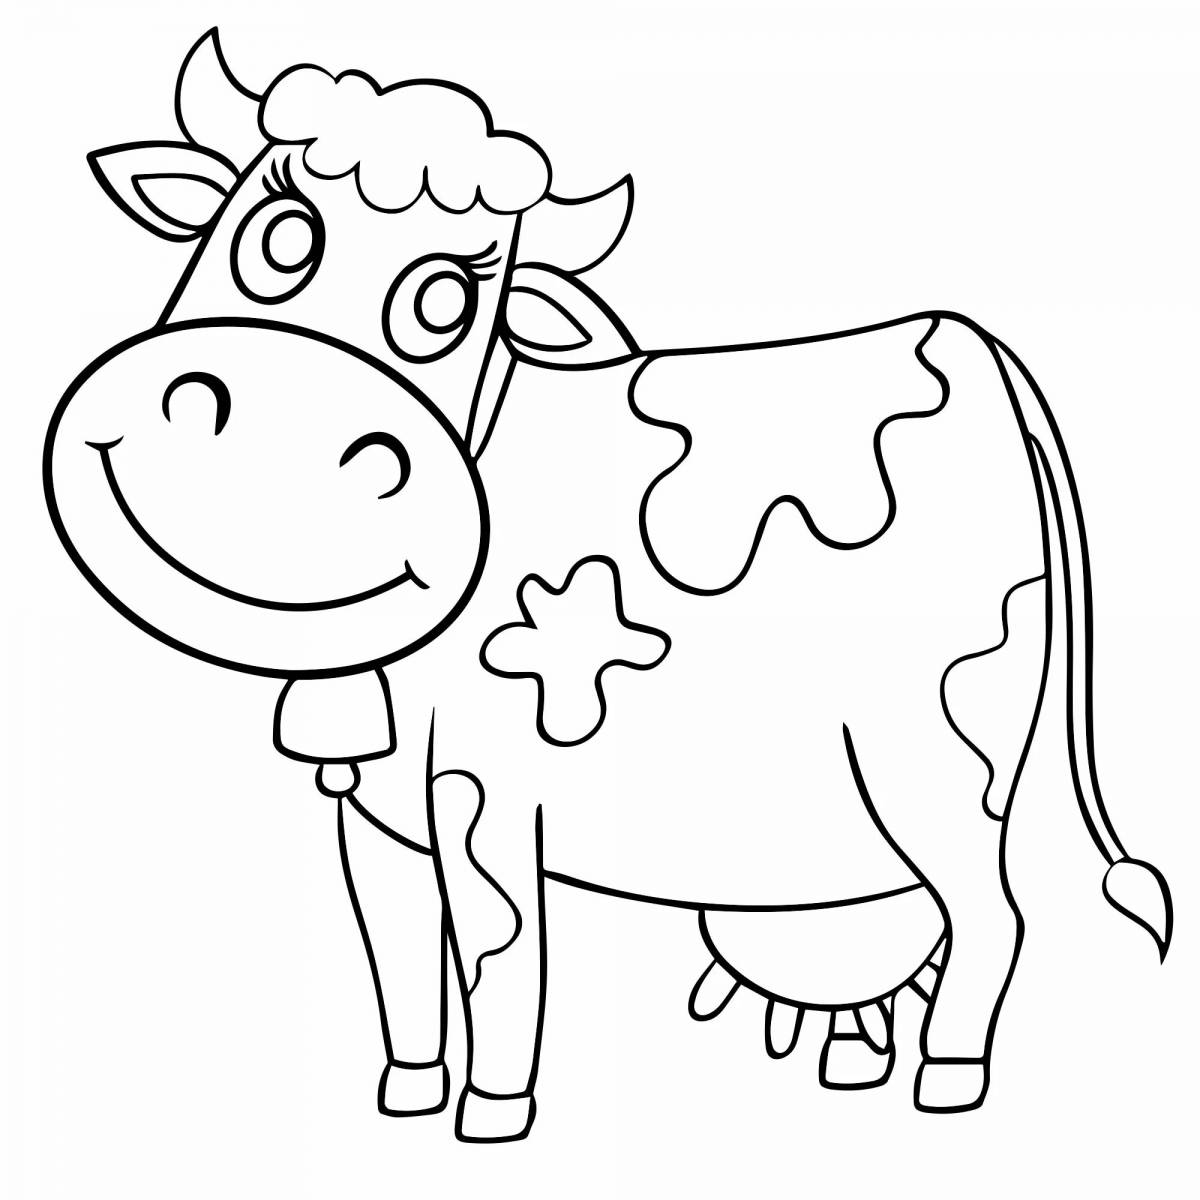 Cow bright coloring for kids 2 3 years old